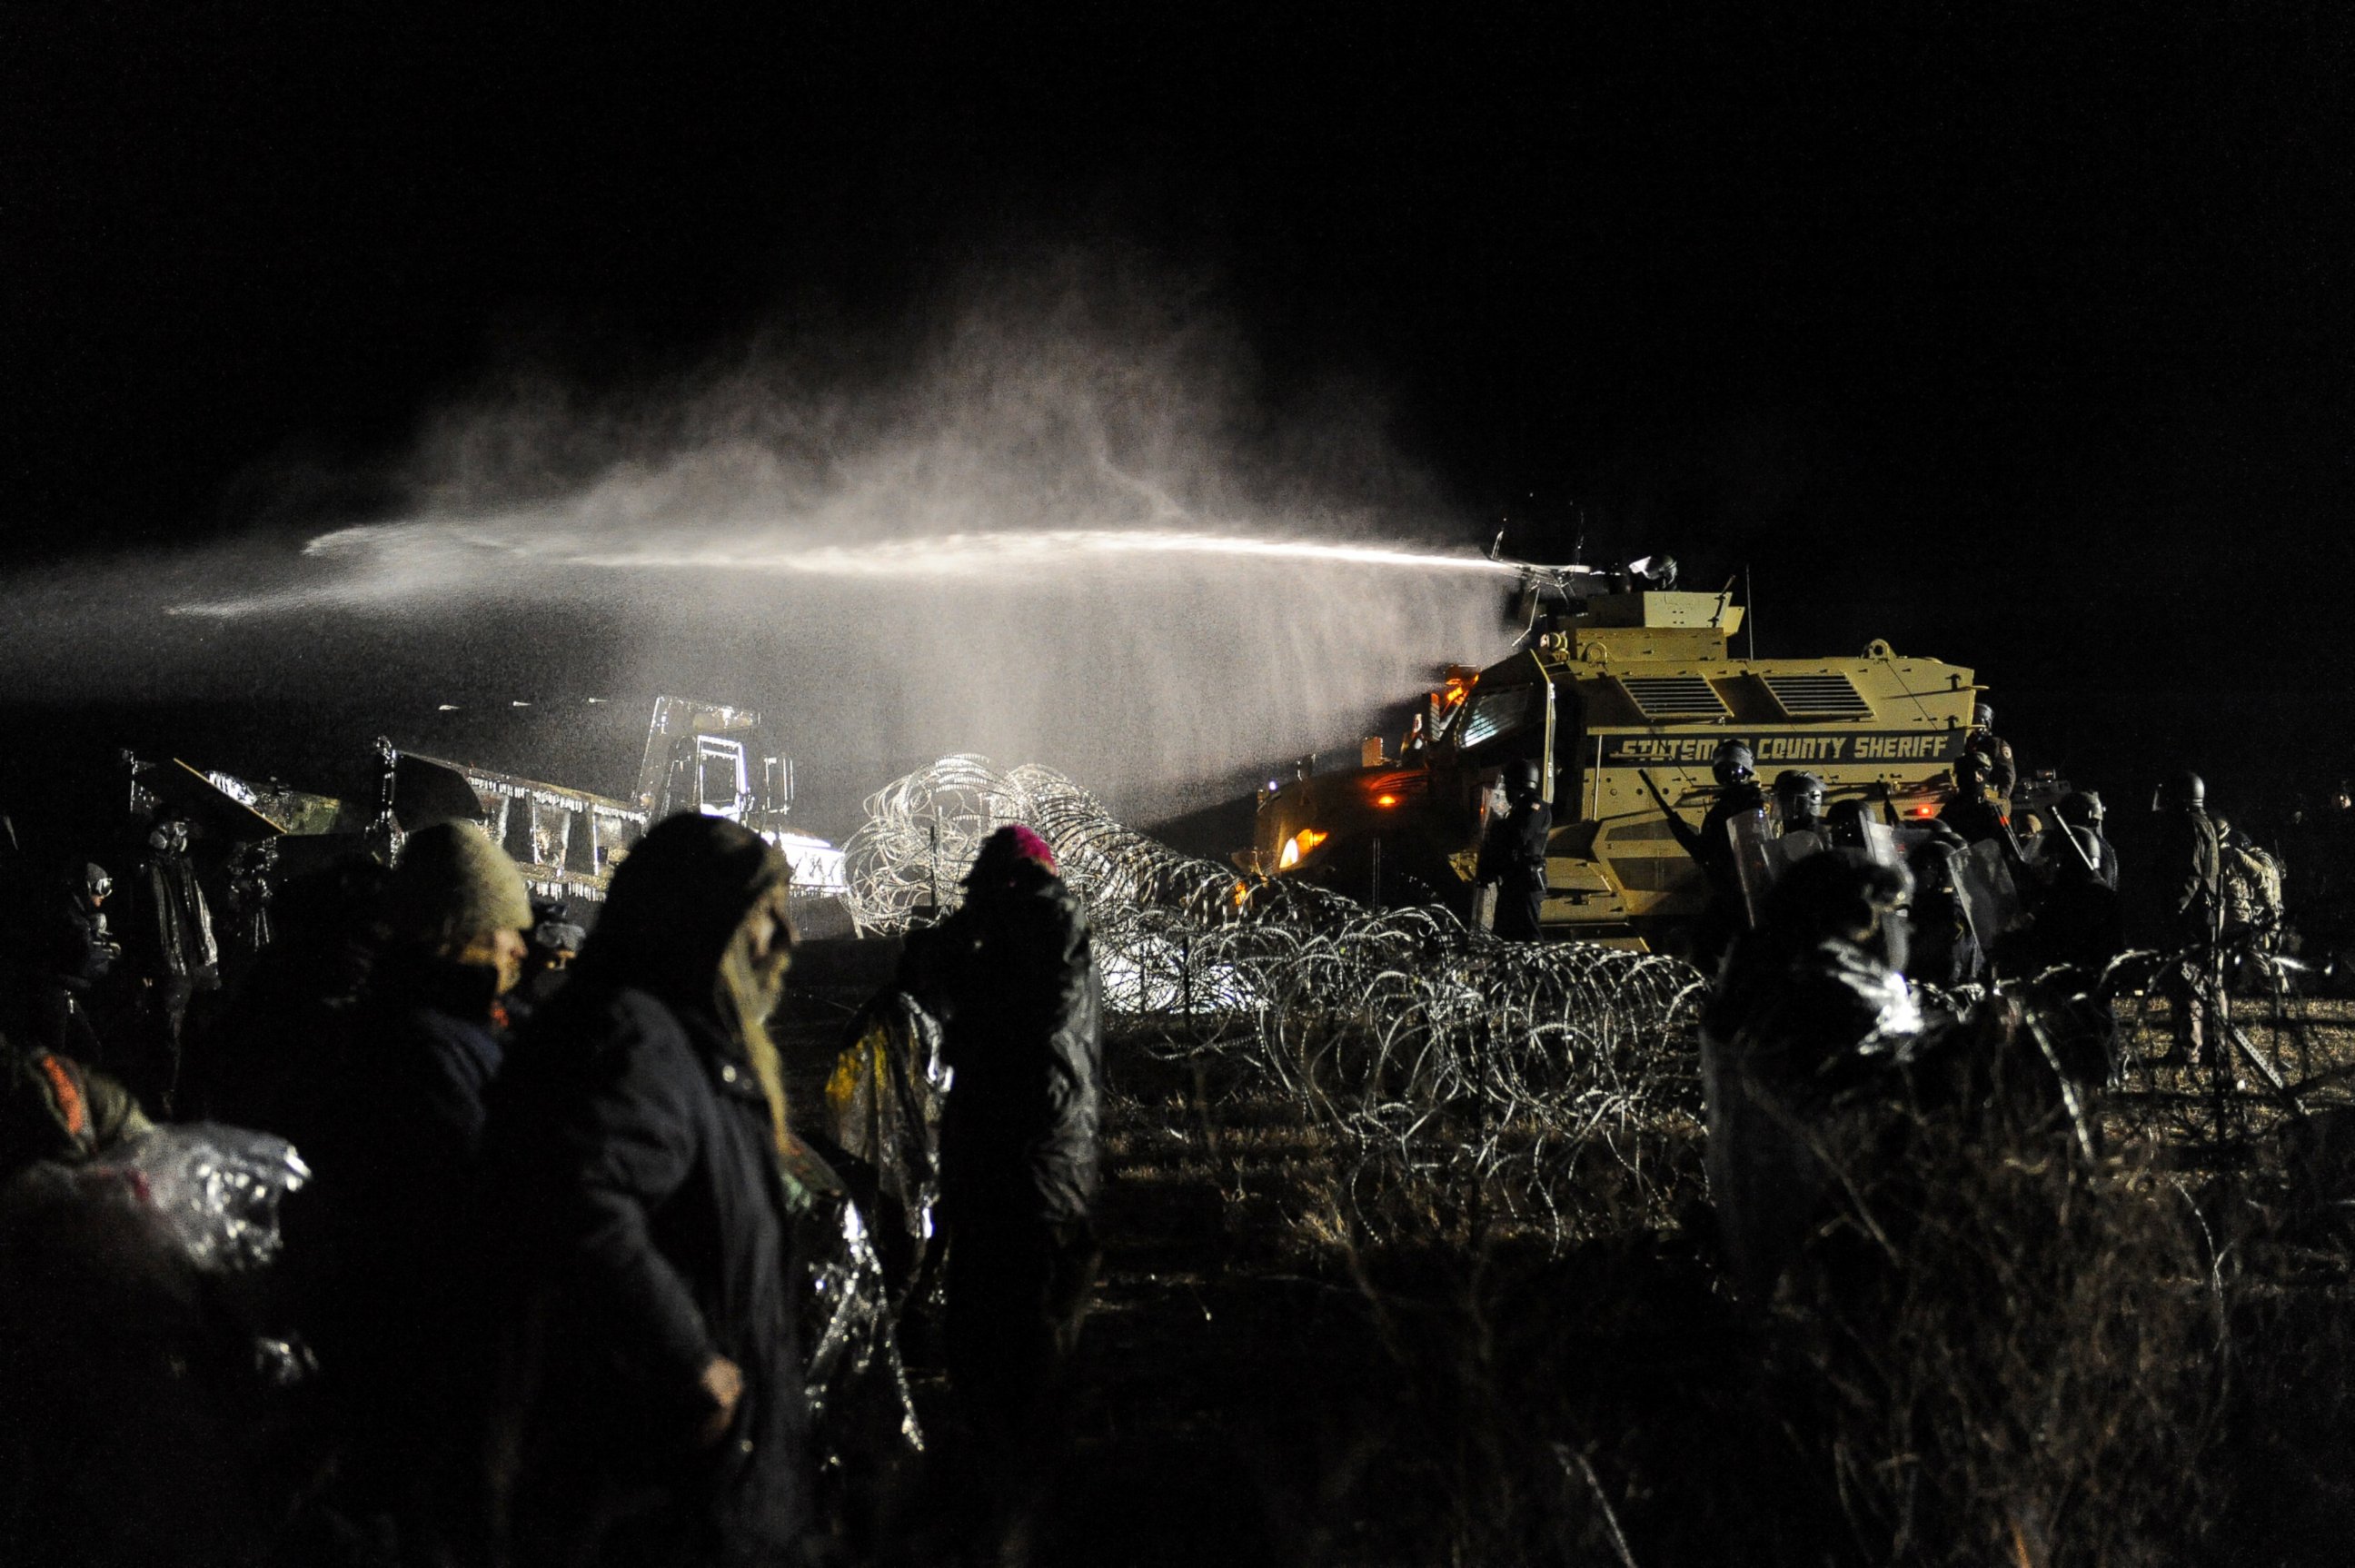 PHOTO: Police use a water cannon on protesters during a protest against plans to pass the Dakota Access pipeline near the Standing Rock Indian Reservation, North Dakota, Nov. 20, 2016.